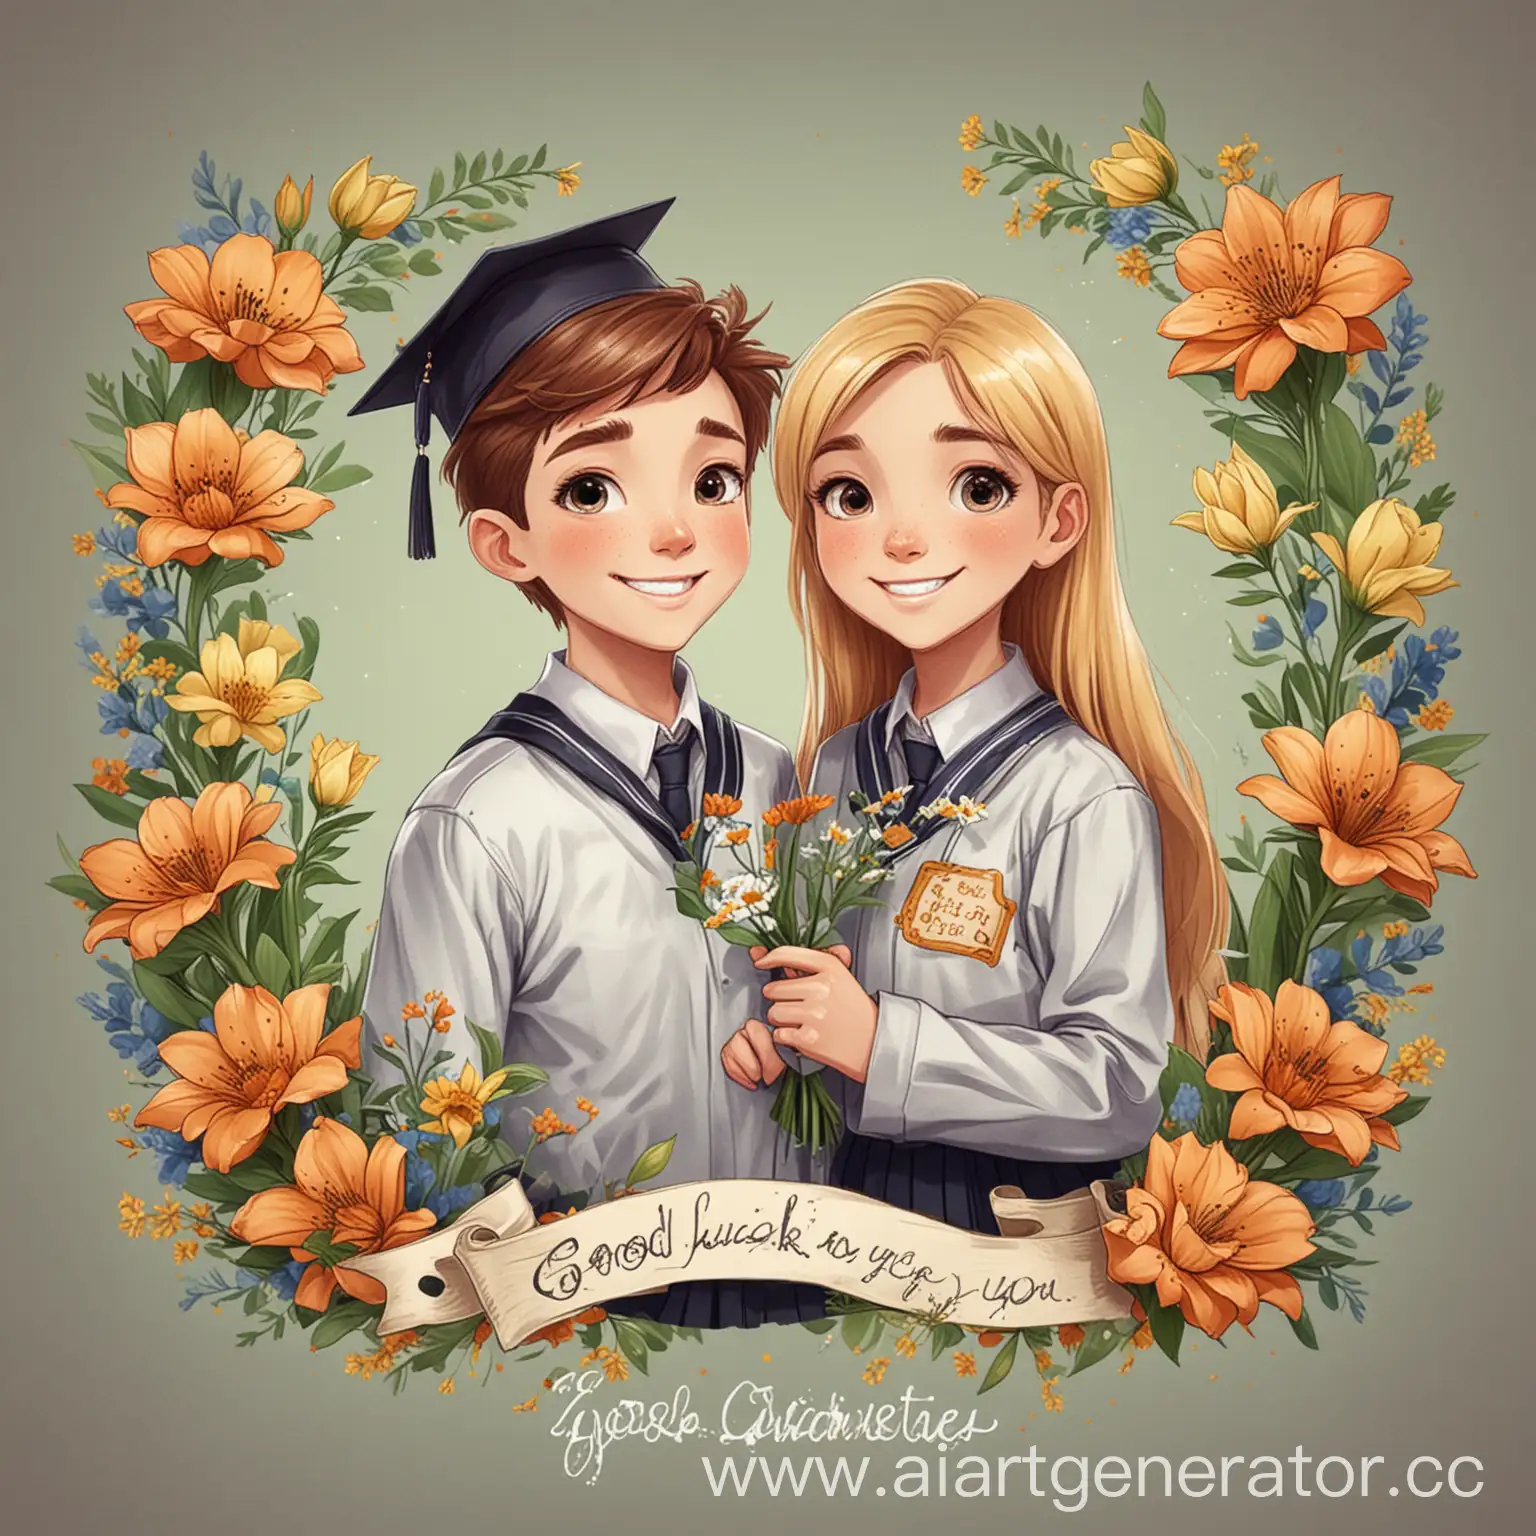 Graduation-Wishes-Guy-and-Girl-in-School-Uniform-with-Flowers